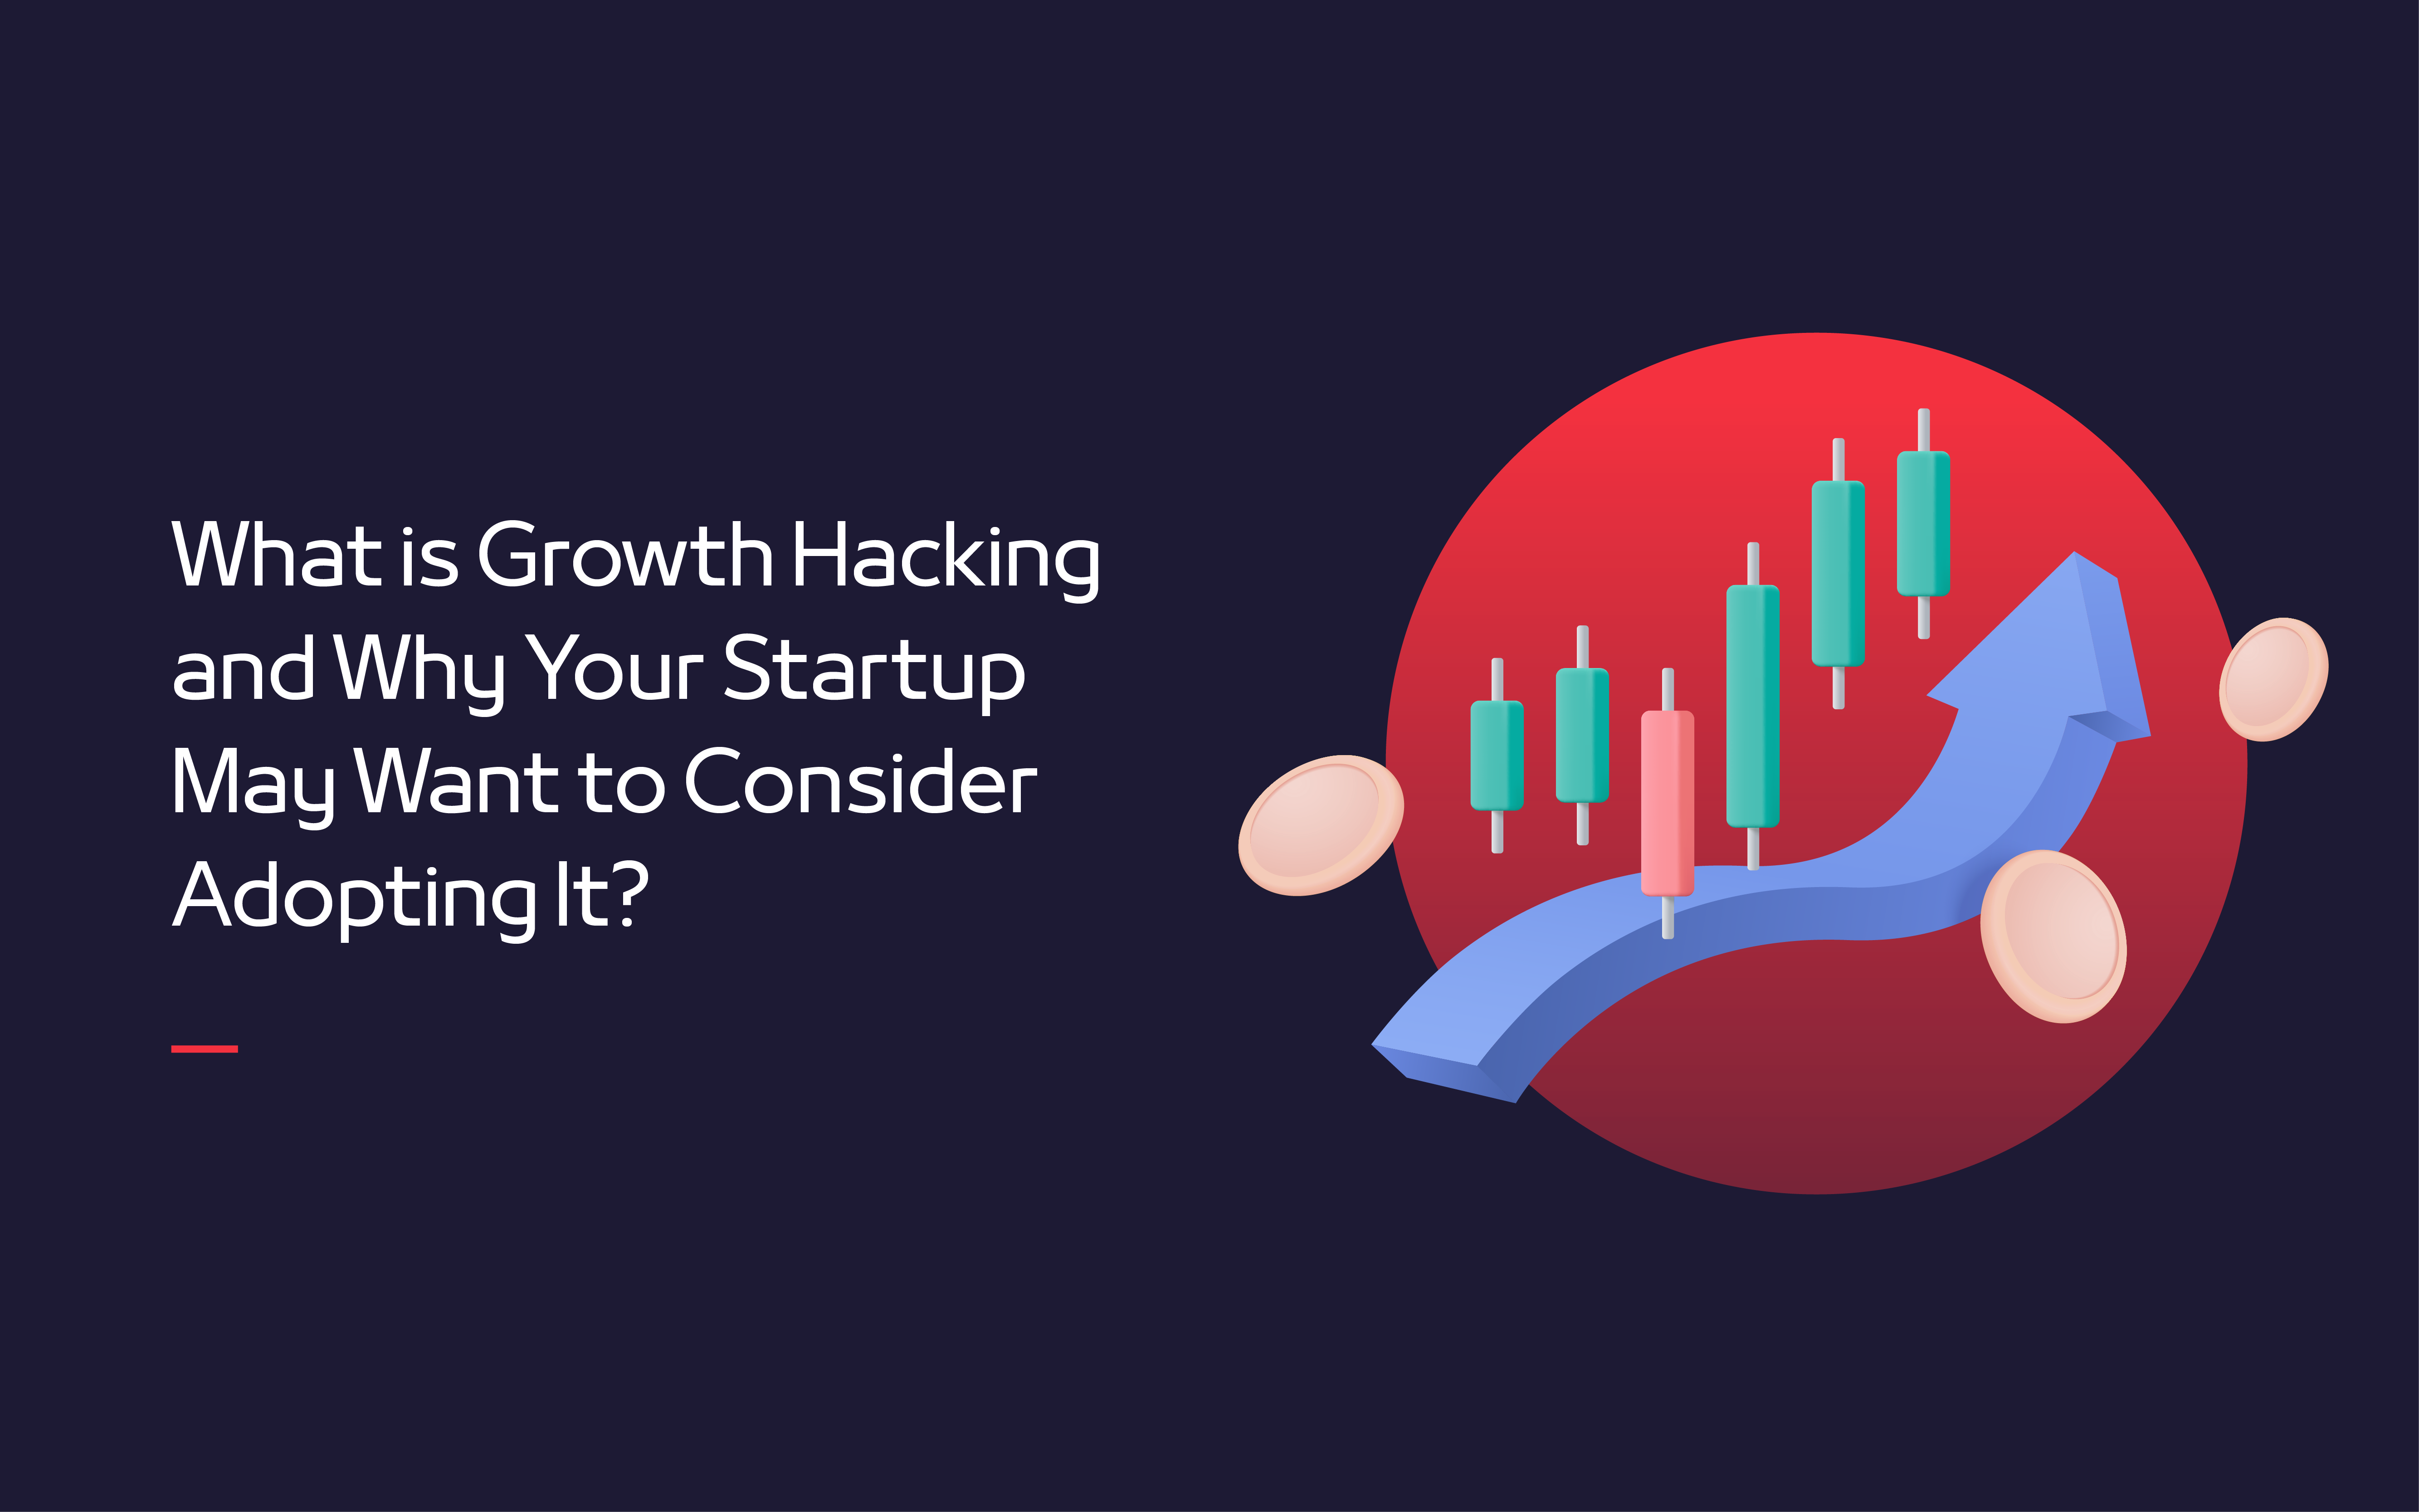 What is Growth Hacking and Why Your Startup May Want to Consider Adopting It?